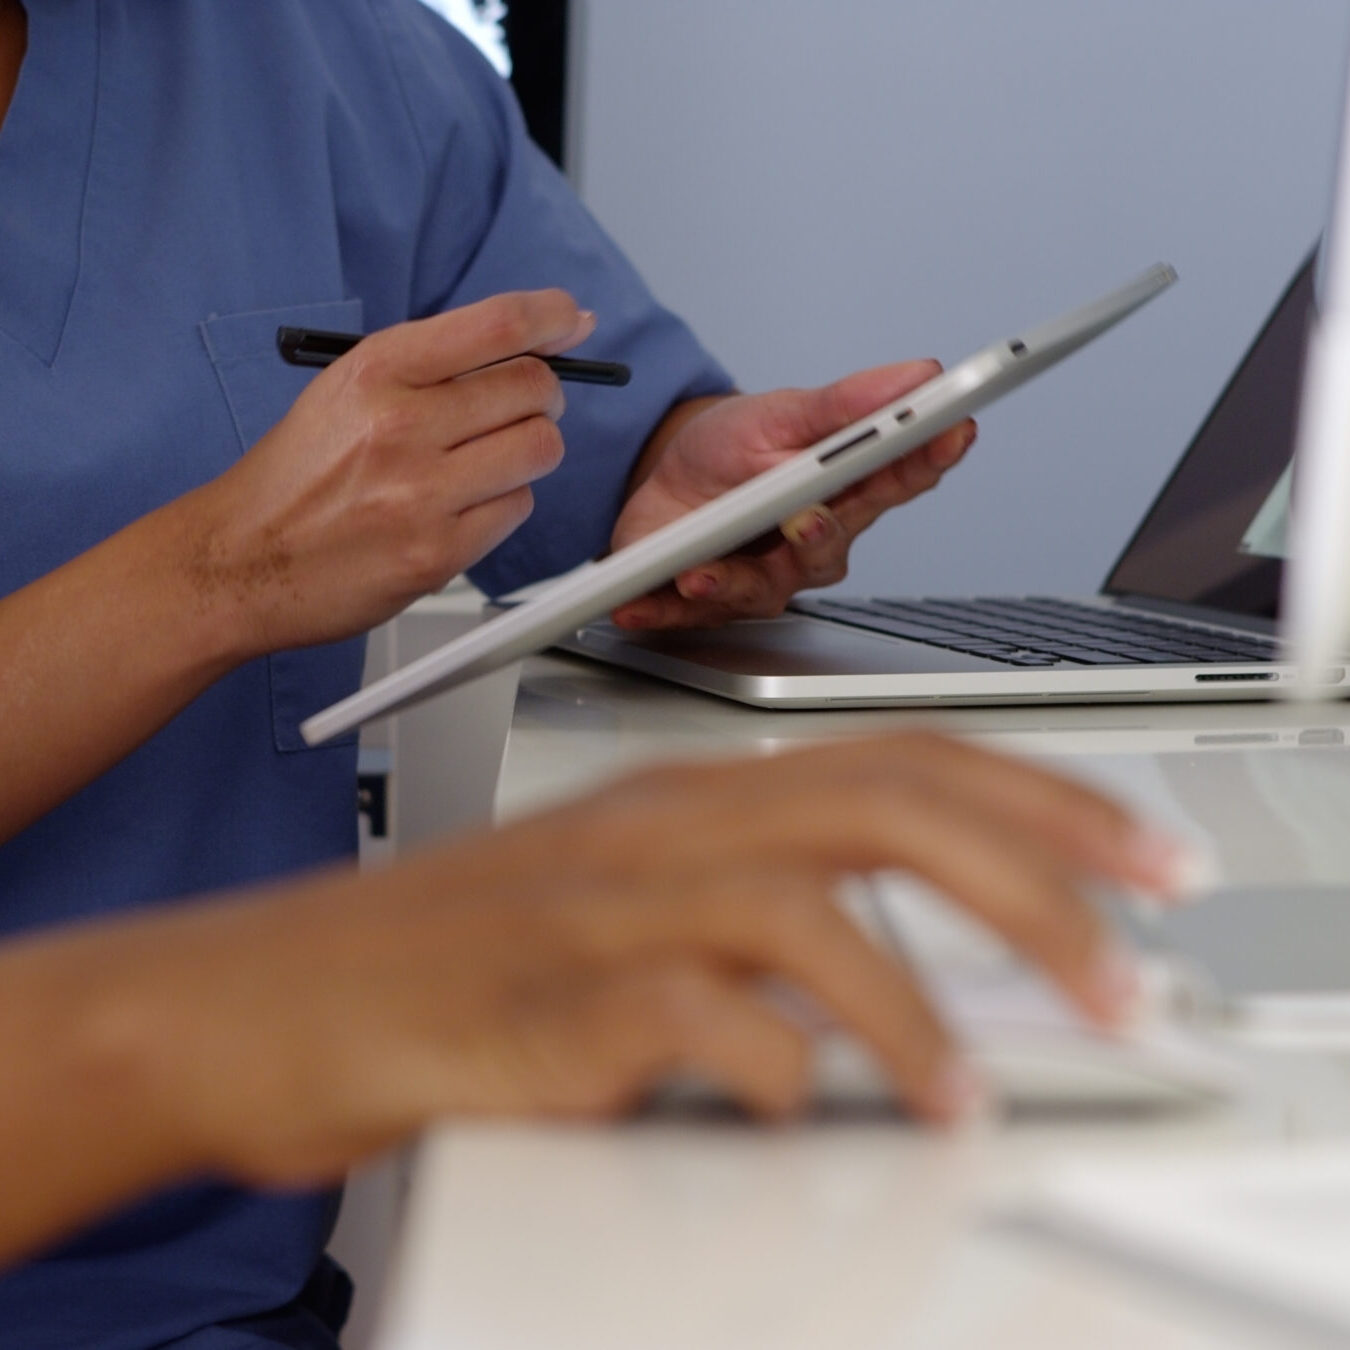 Close up hands of two female doctors working with computers